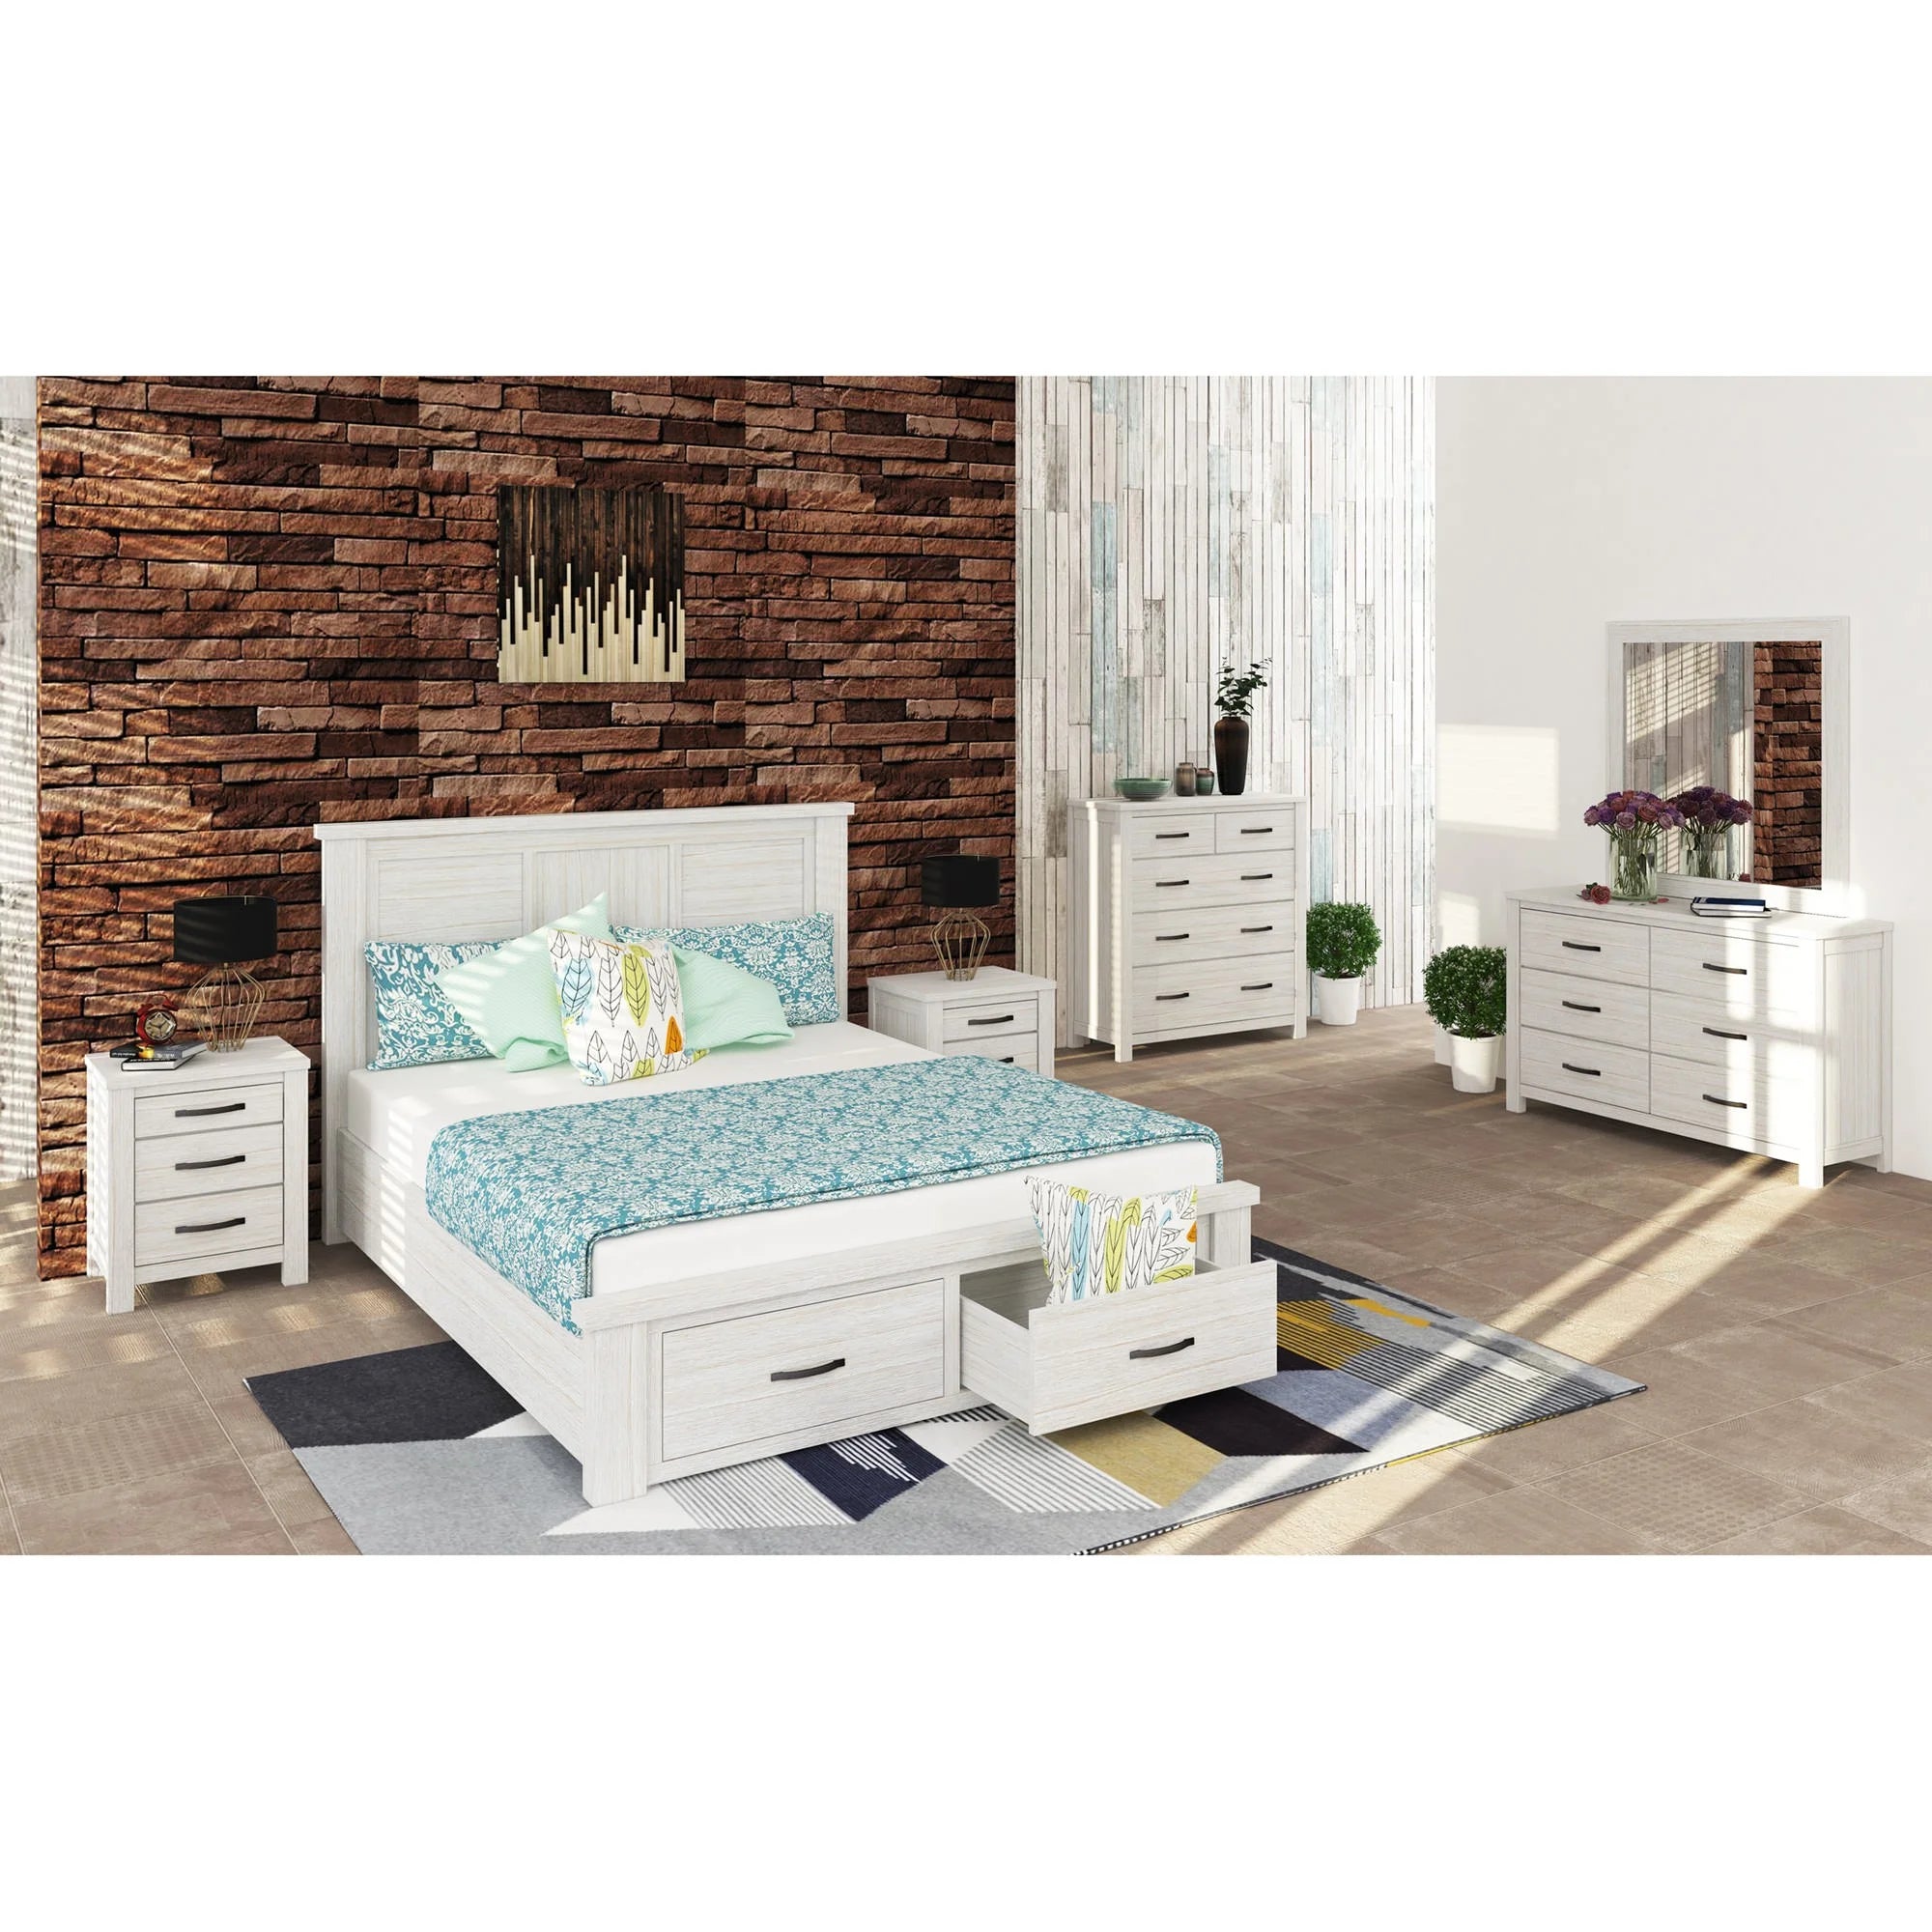 Frankie 4 Piece Mountain Ash Timber Bedroom Suite with Tallboy, Queen